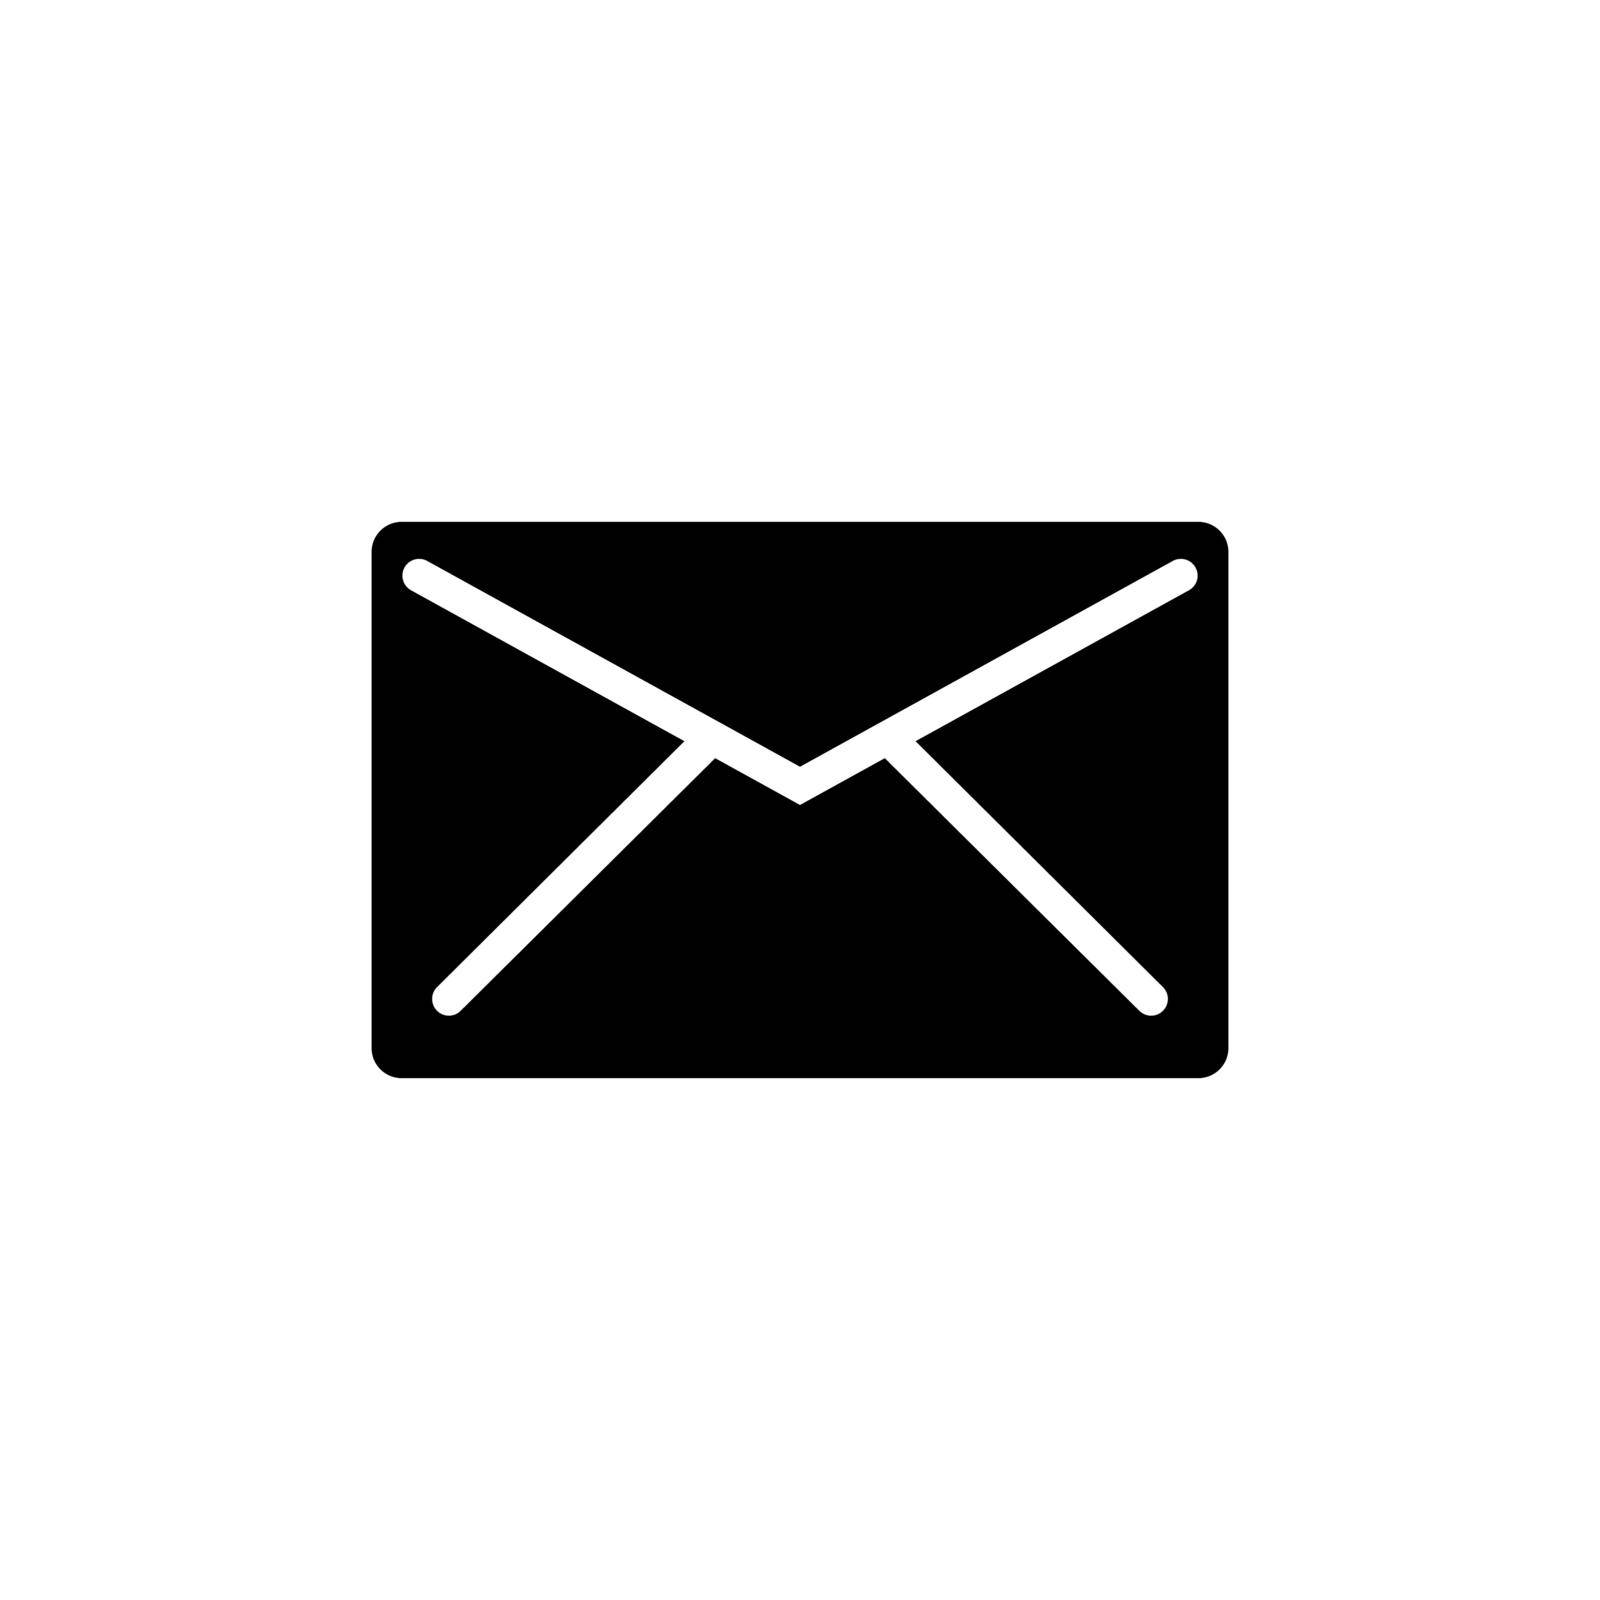 Envelope Mail, Letter, Correspondence. Flat Vector Icon illustration. Simple black symbol on white background. Letter, Envelope Mail, Correspondence sign design template for web and mobile UI element